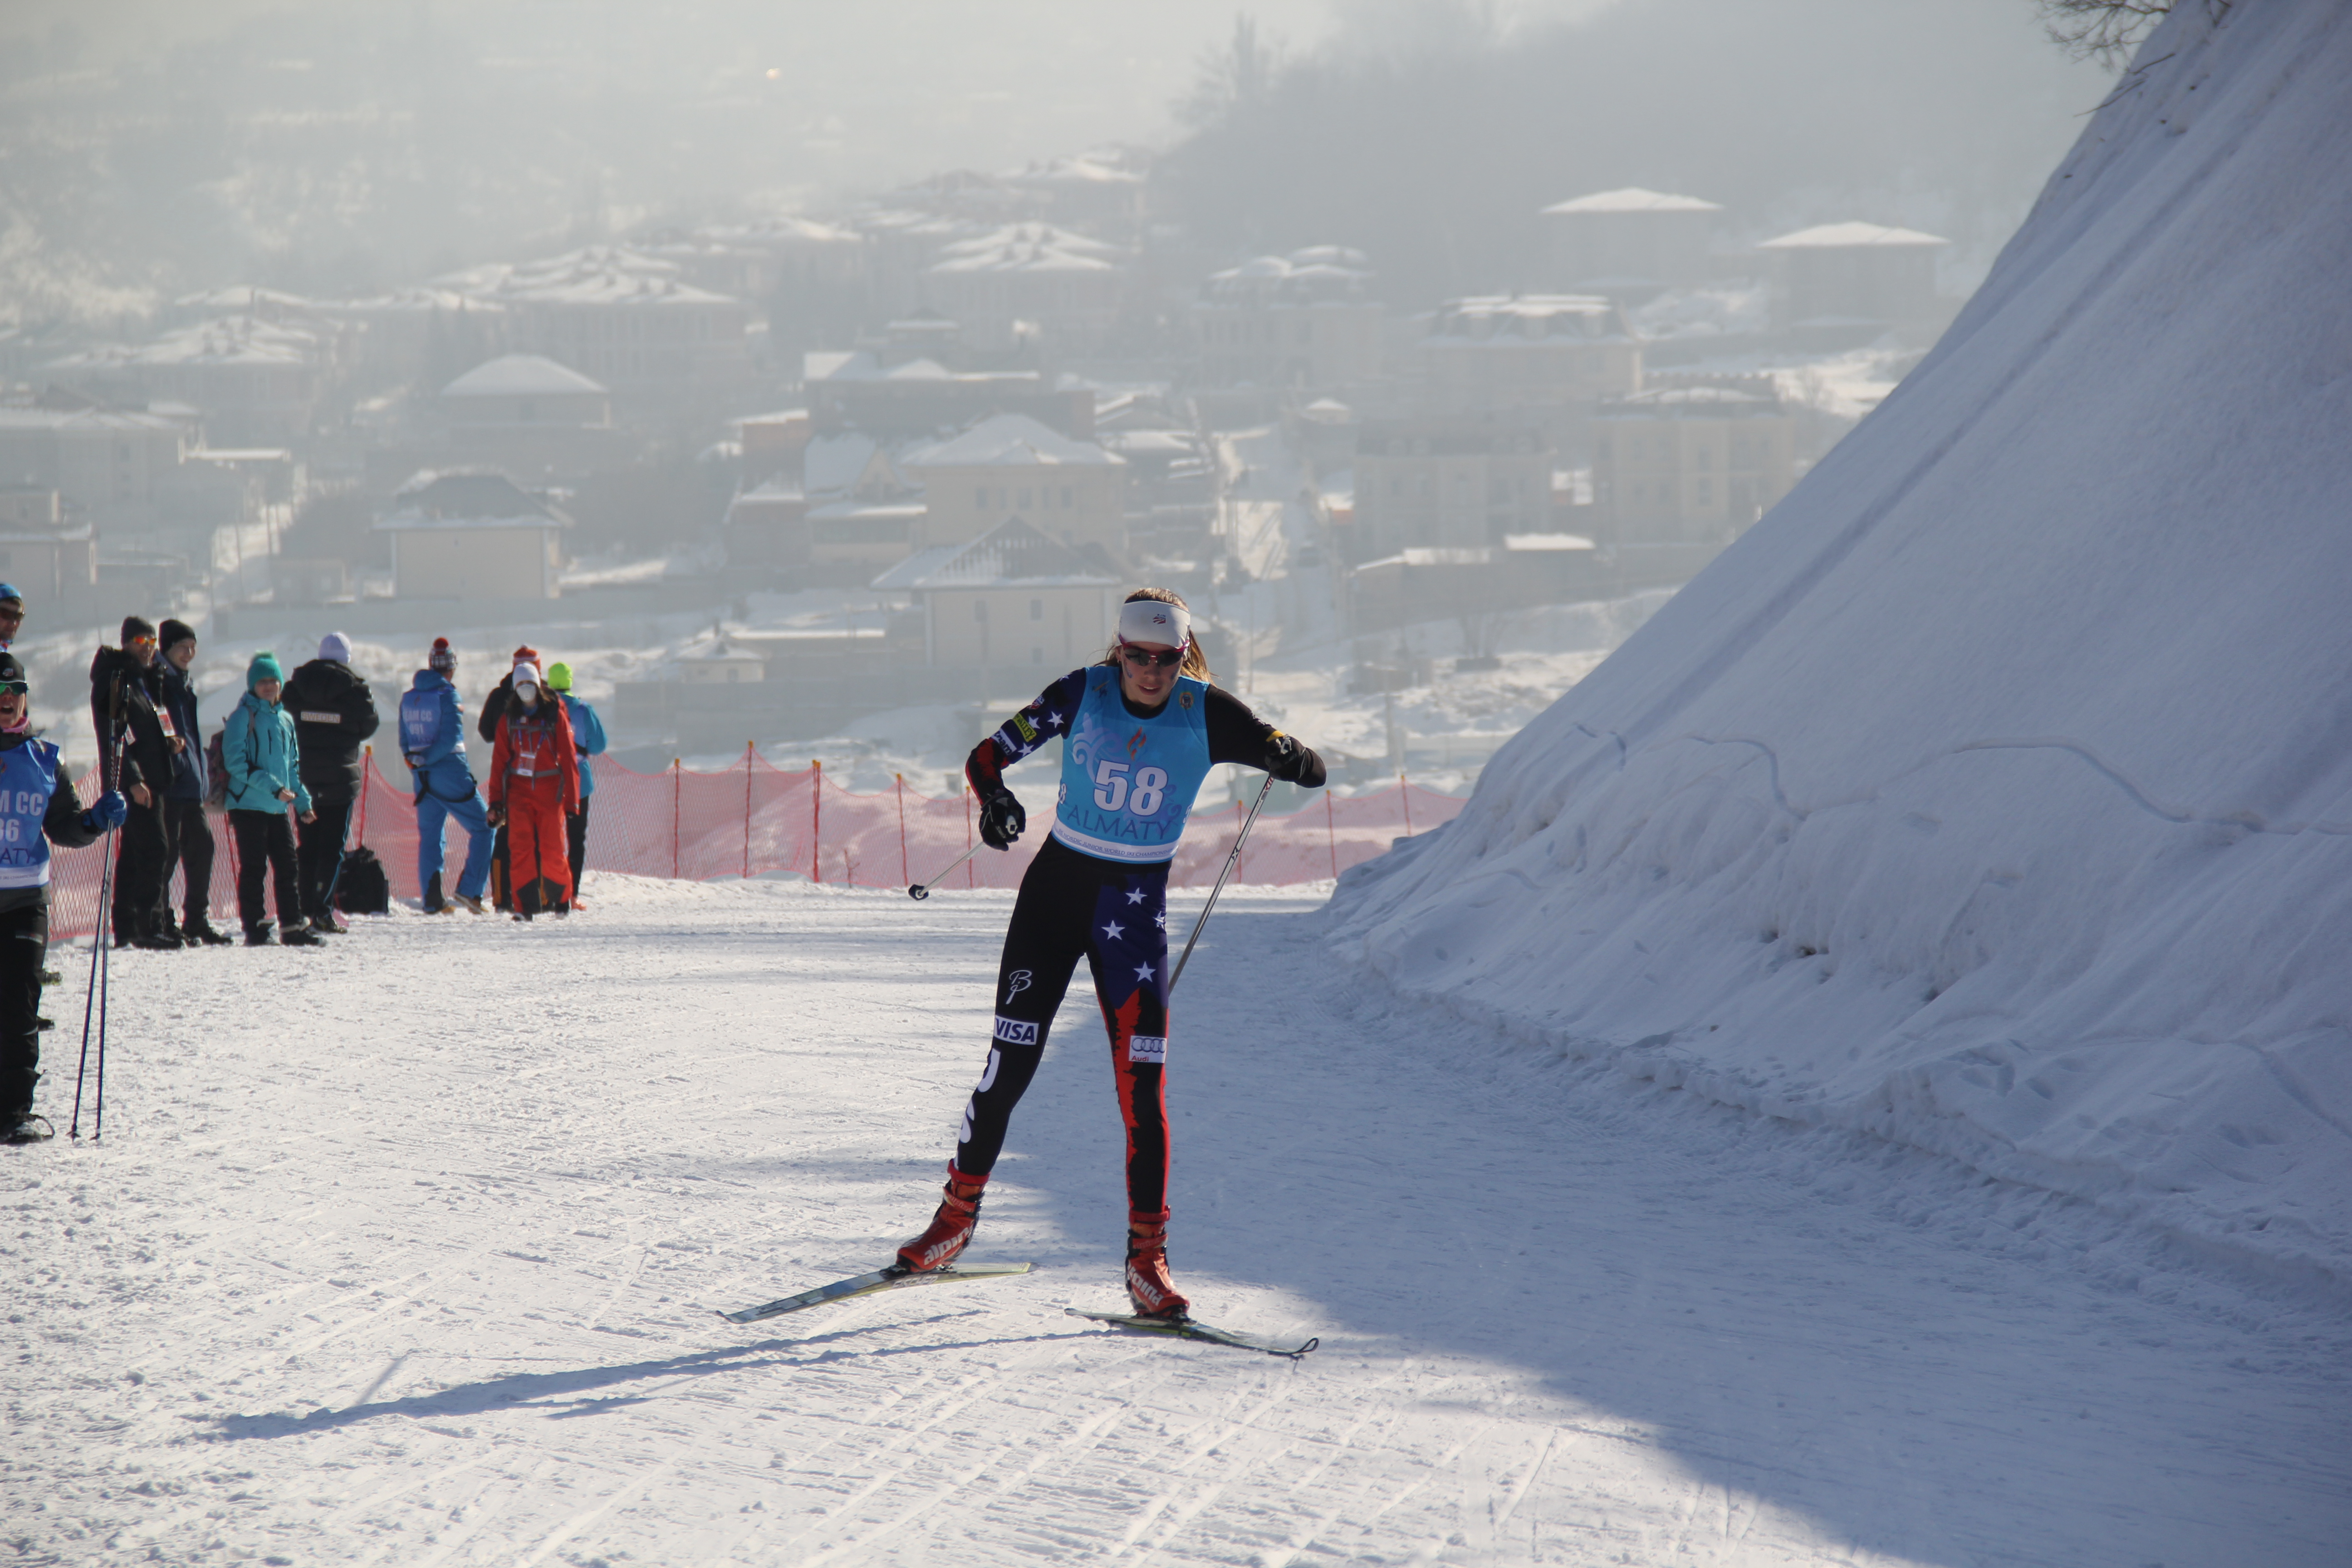 Katharine Ogden (SMS) placed 11th in Wednesday's 5 k freestyle in the Junior World Championships in Almaty, Kazakhstan.